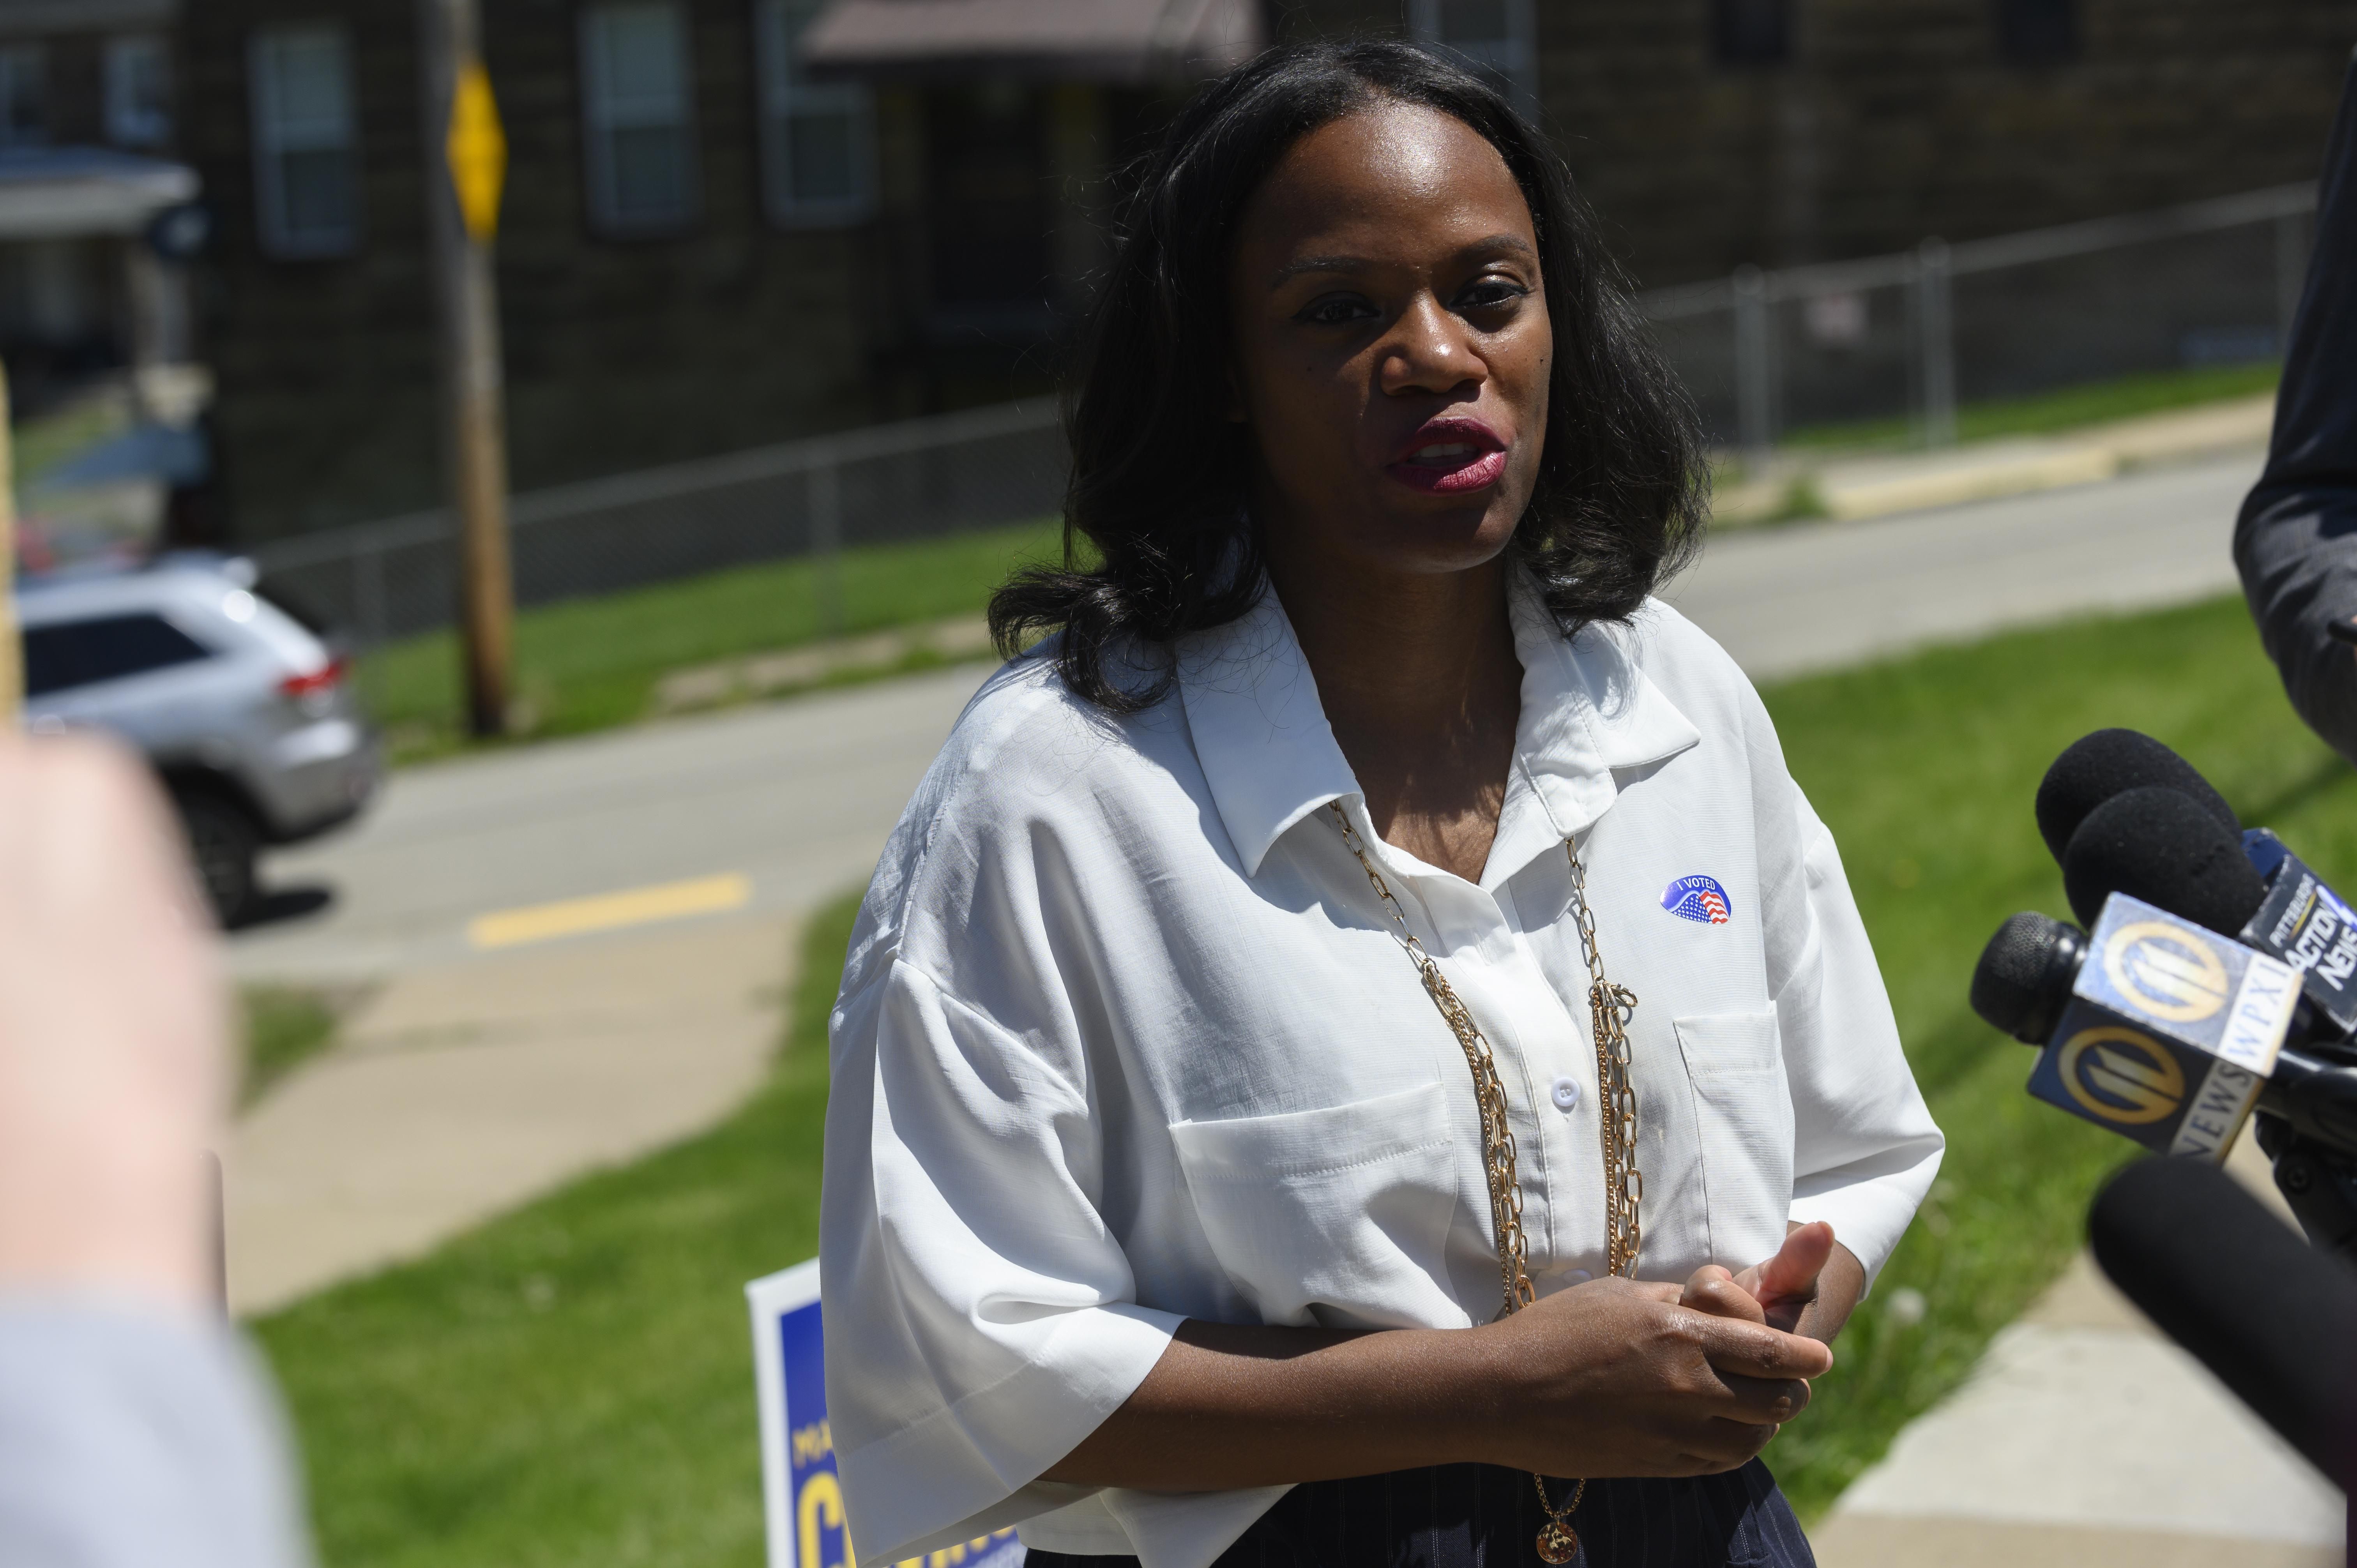 Pennsylvania Democratic congressional candidate Summer Lee talks to the press outside of a polling station on May 17, 2022 in Pittsburgh.